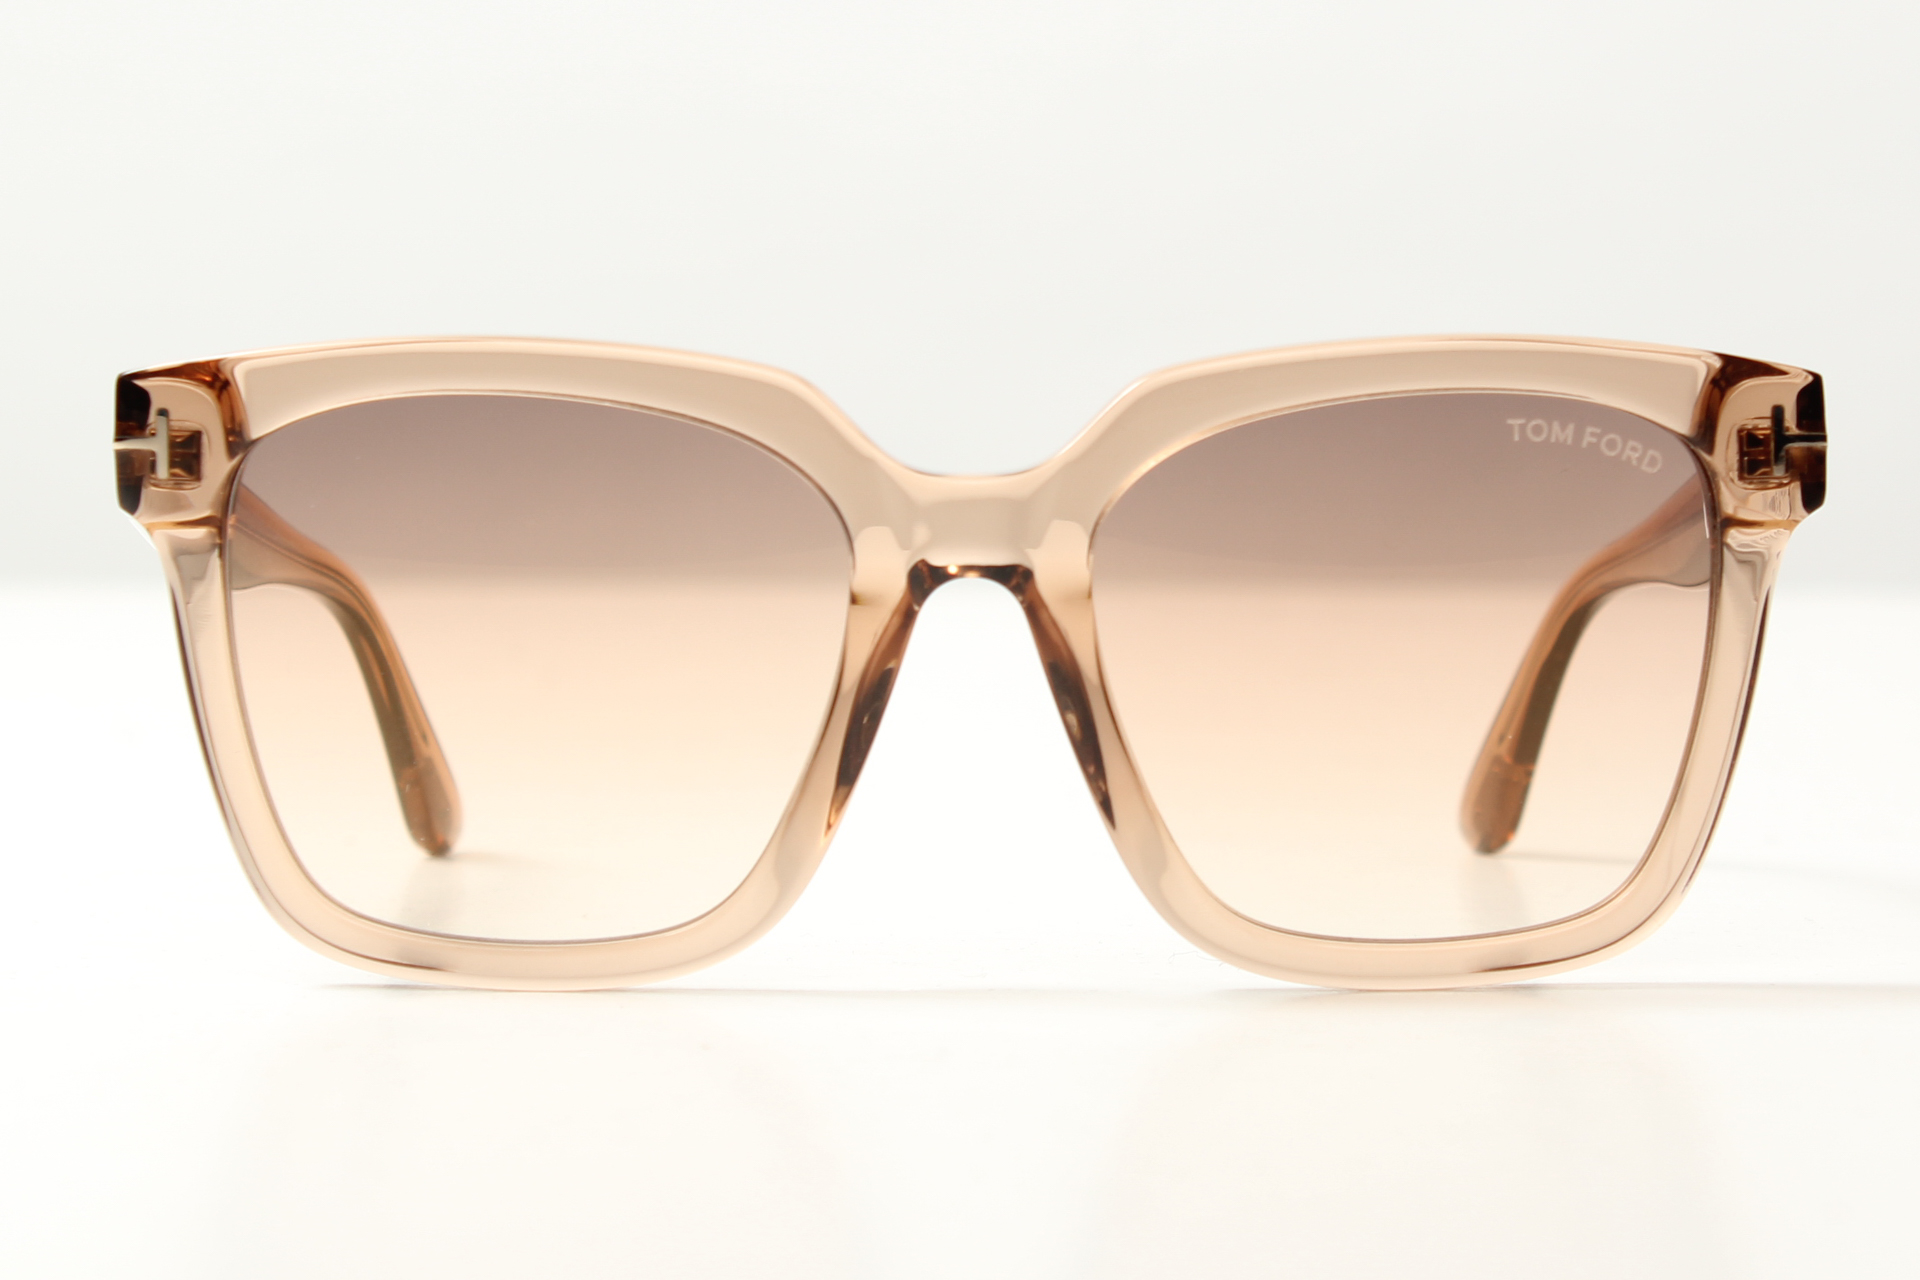 Tom Ford TF952/Selby 45G